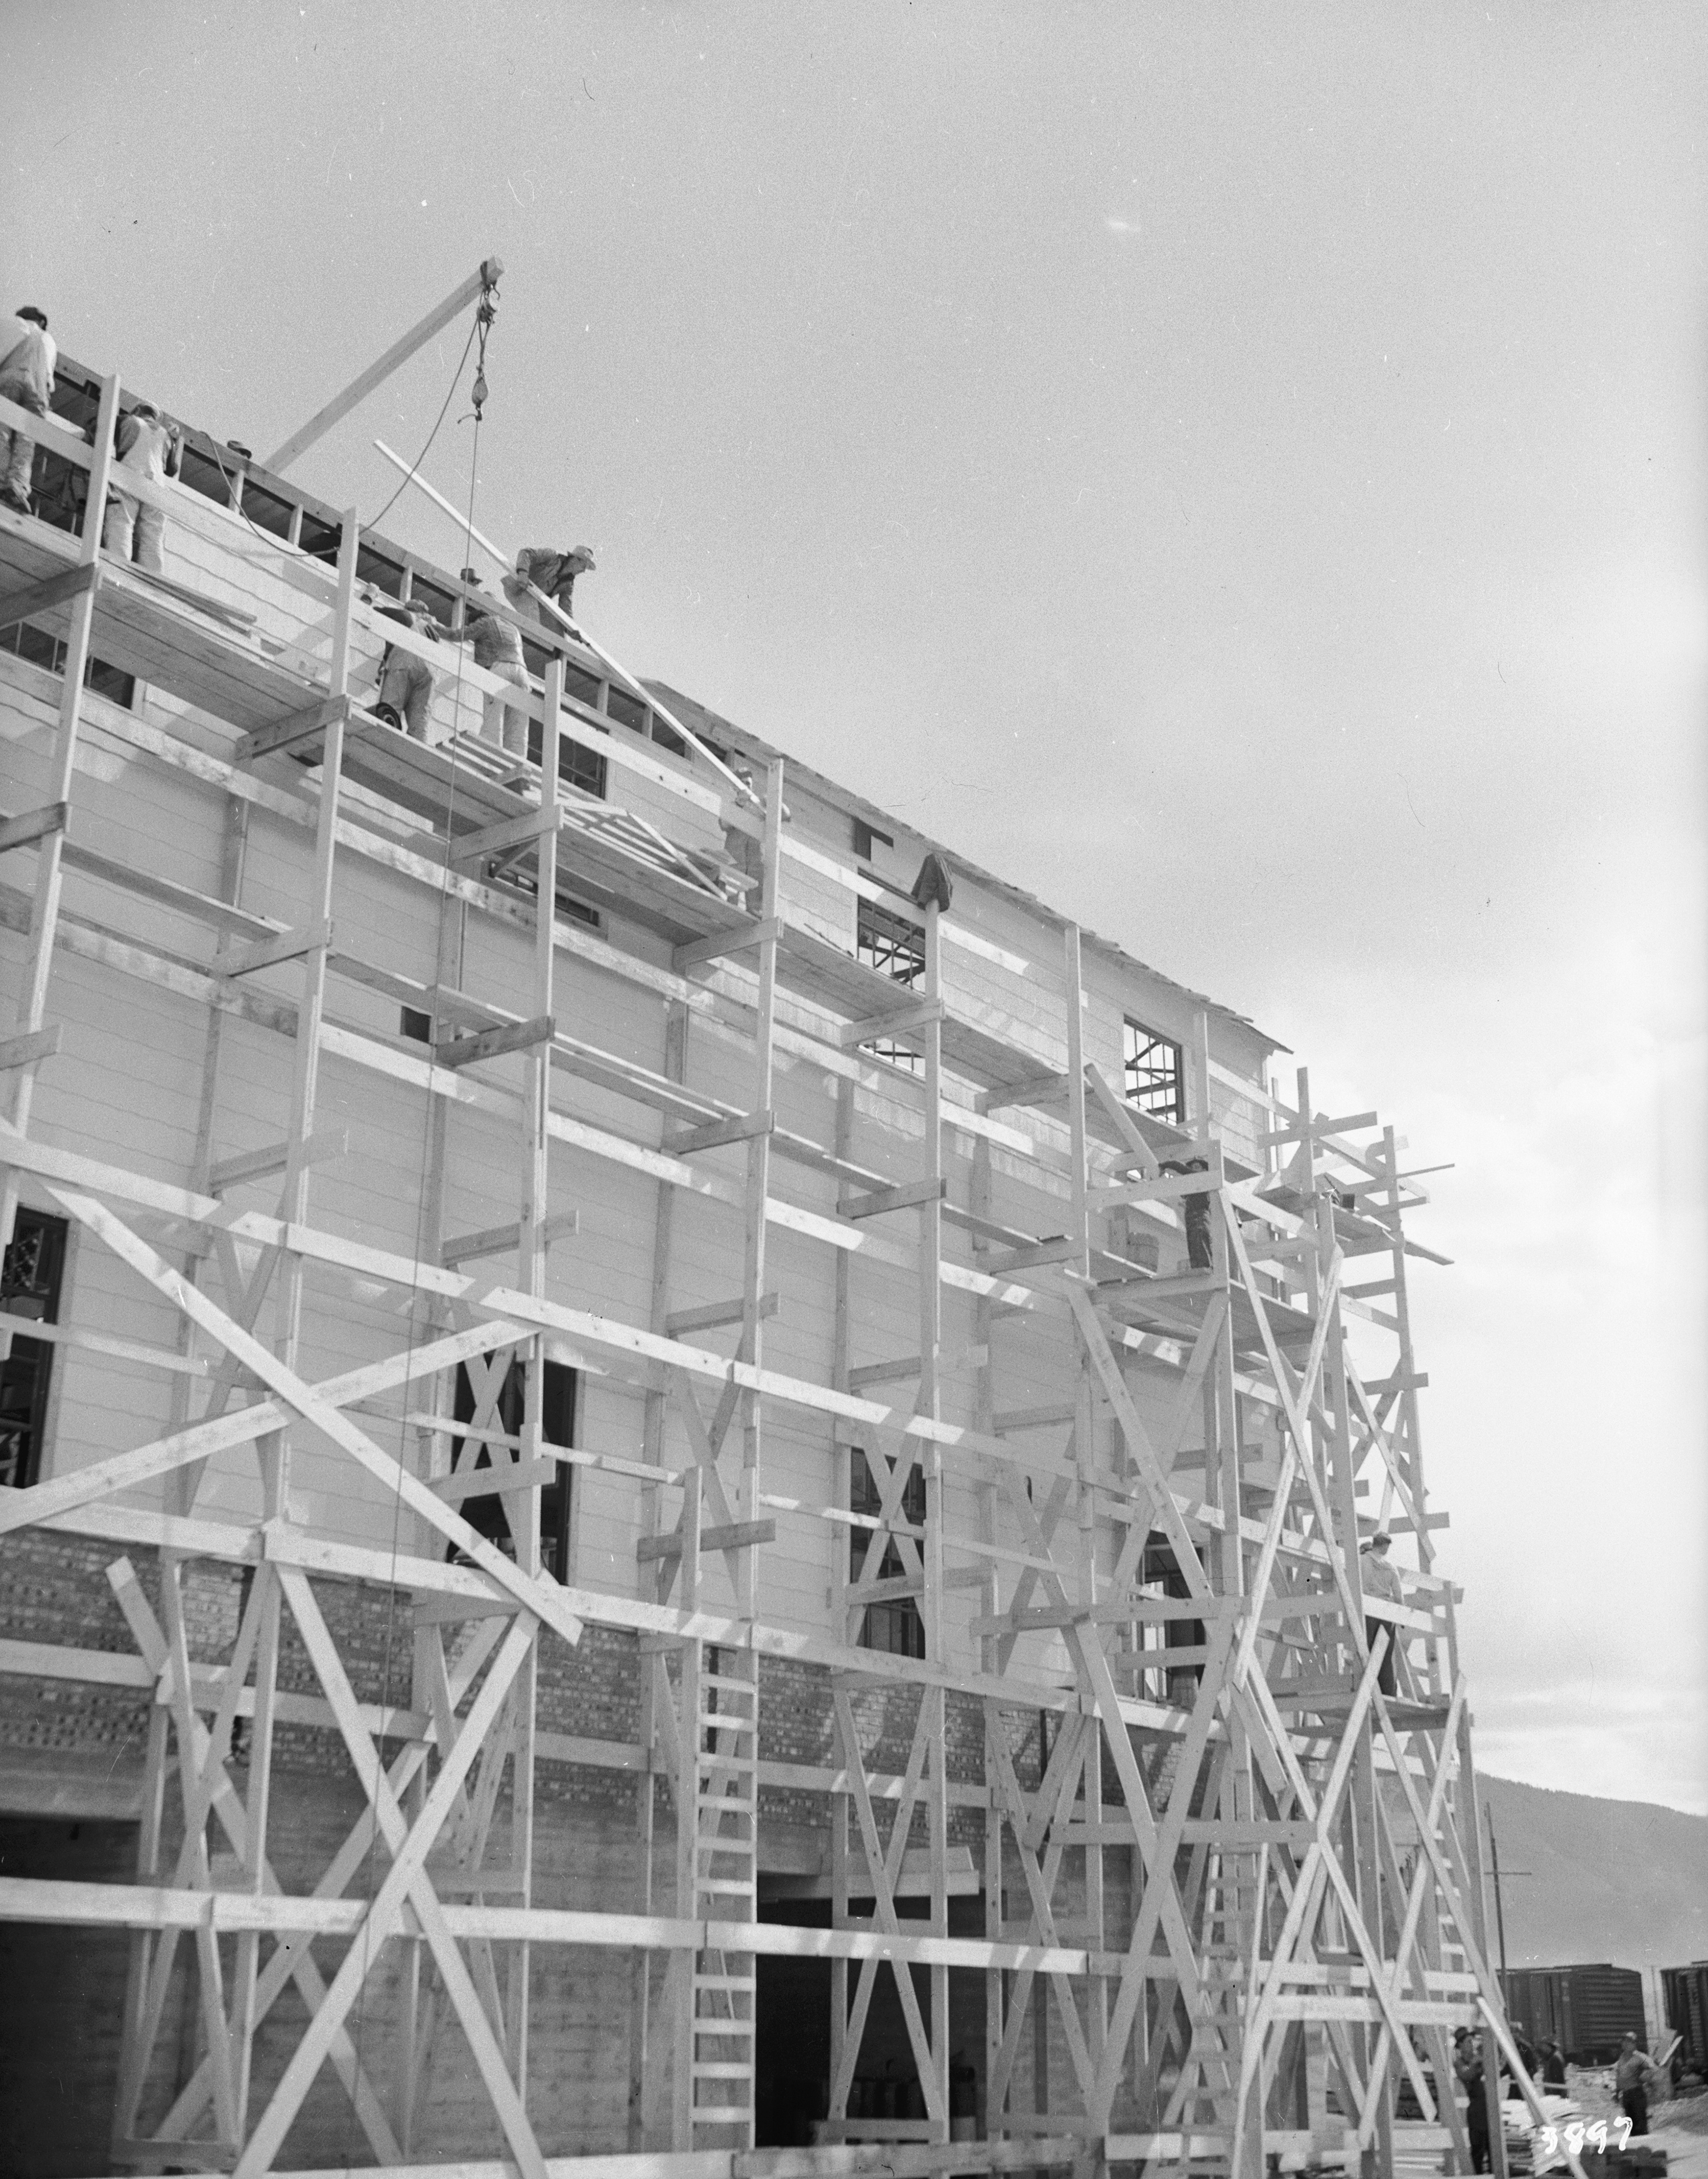 Scaffolding on the exterior of a building.